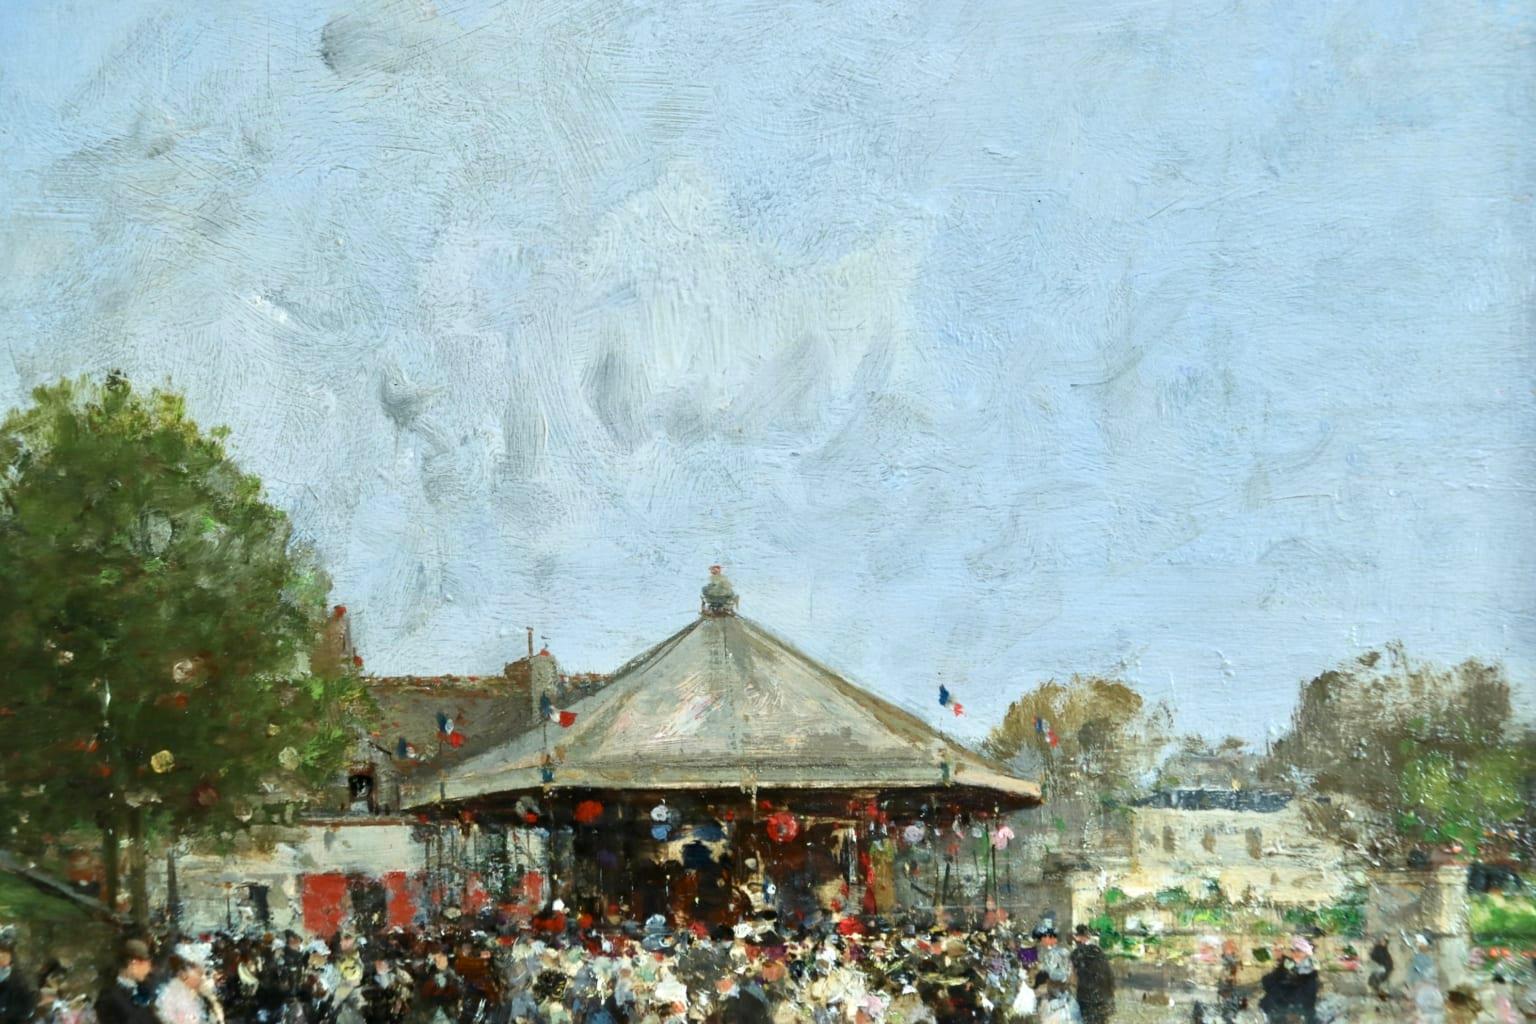 A wonderful oil on panel circa 1890 by French impressionist painter Luigi Loir depicting families enjoying a day at a fairground in Paris. Signed lower right.

Dimensions:
Framed: 20